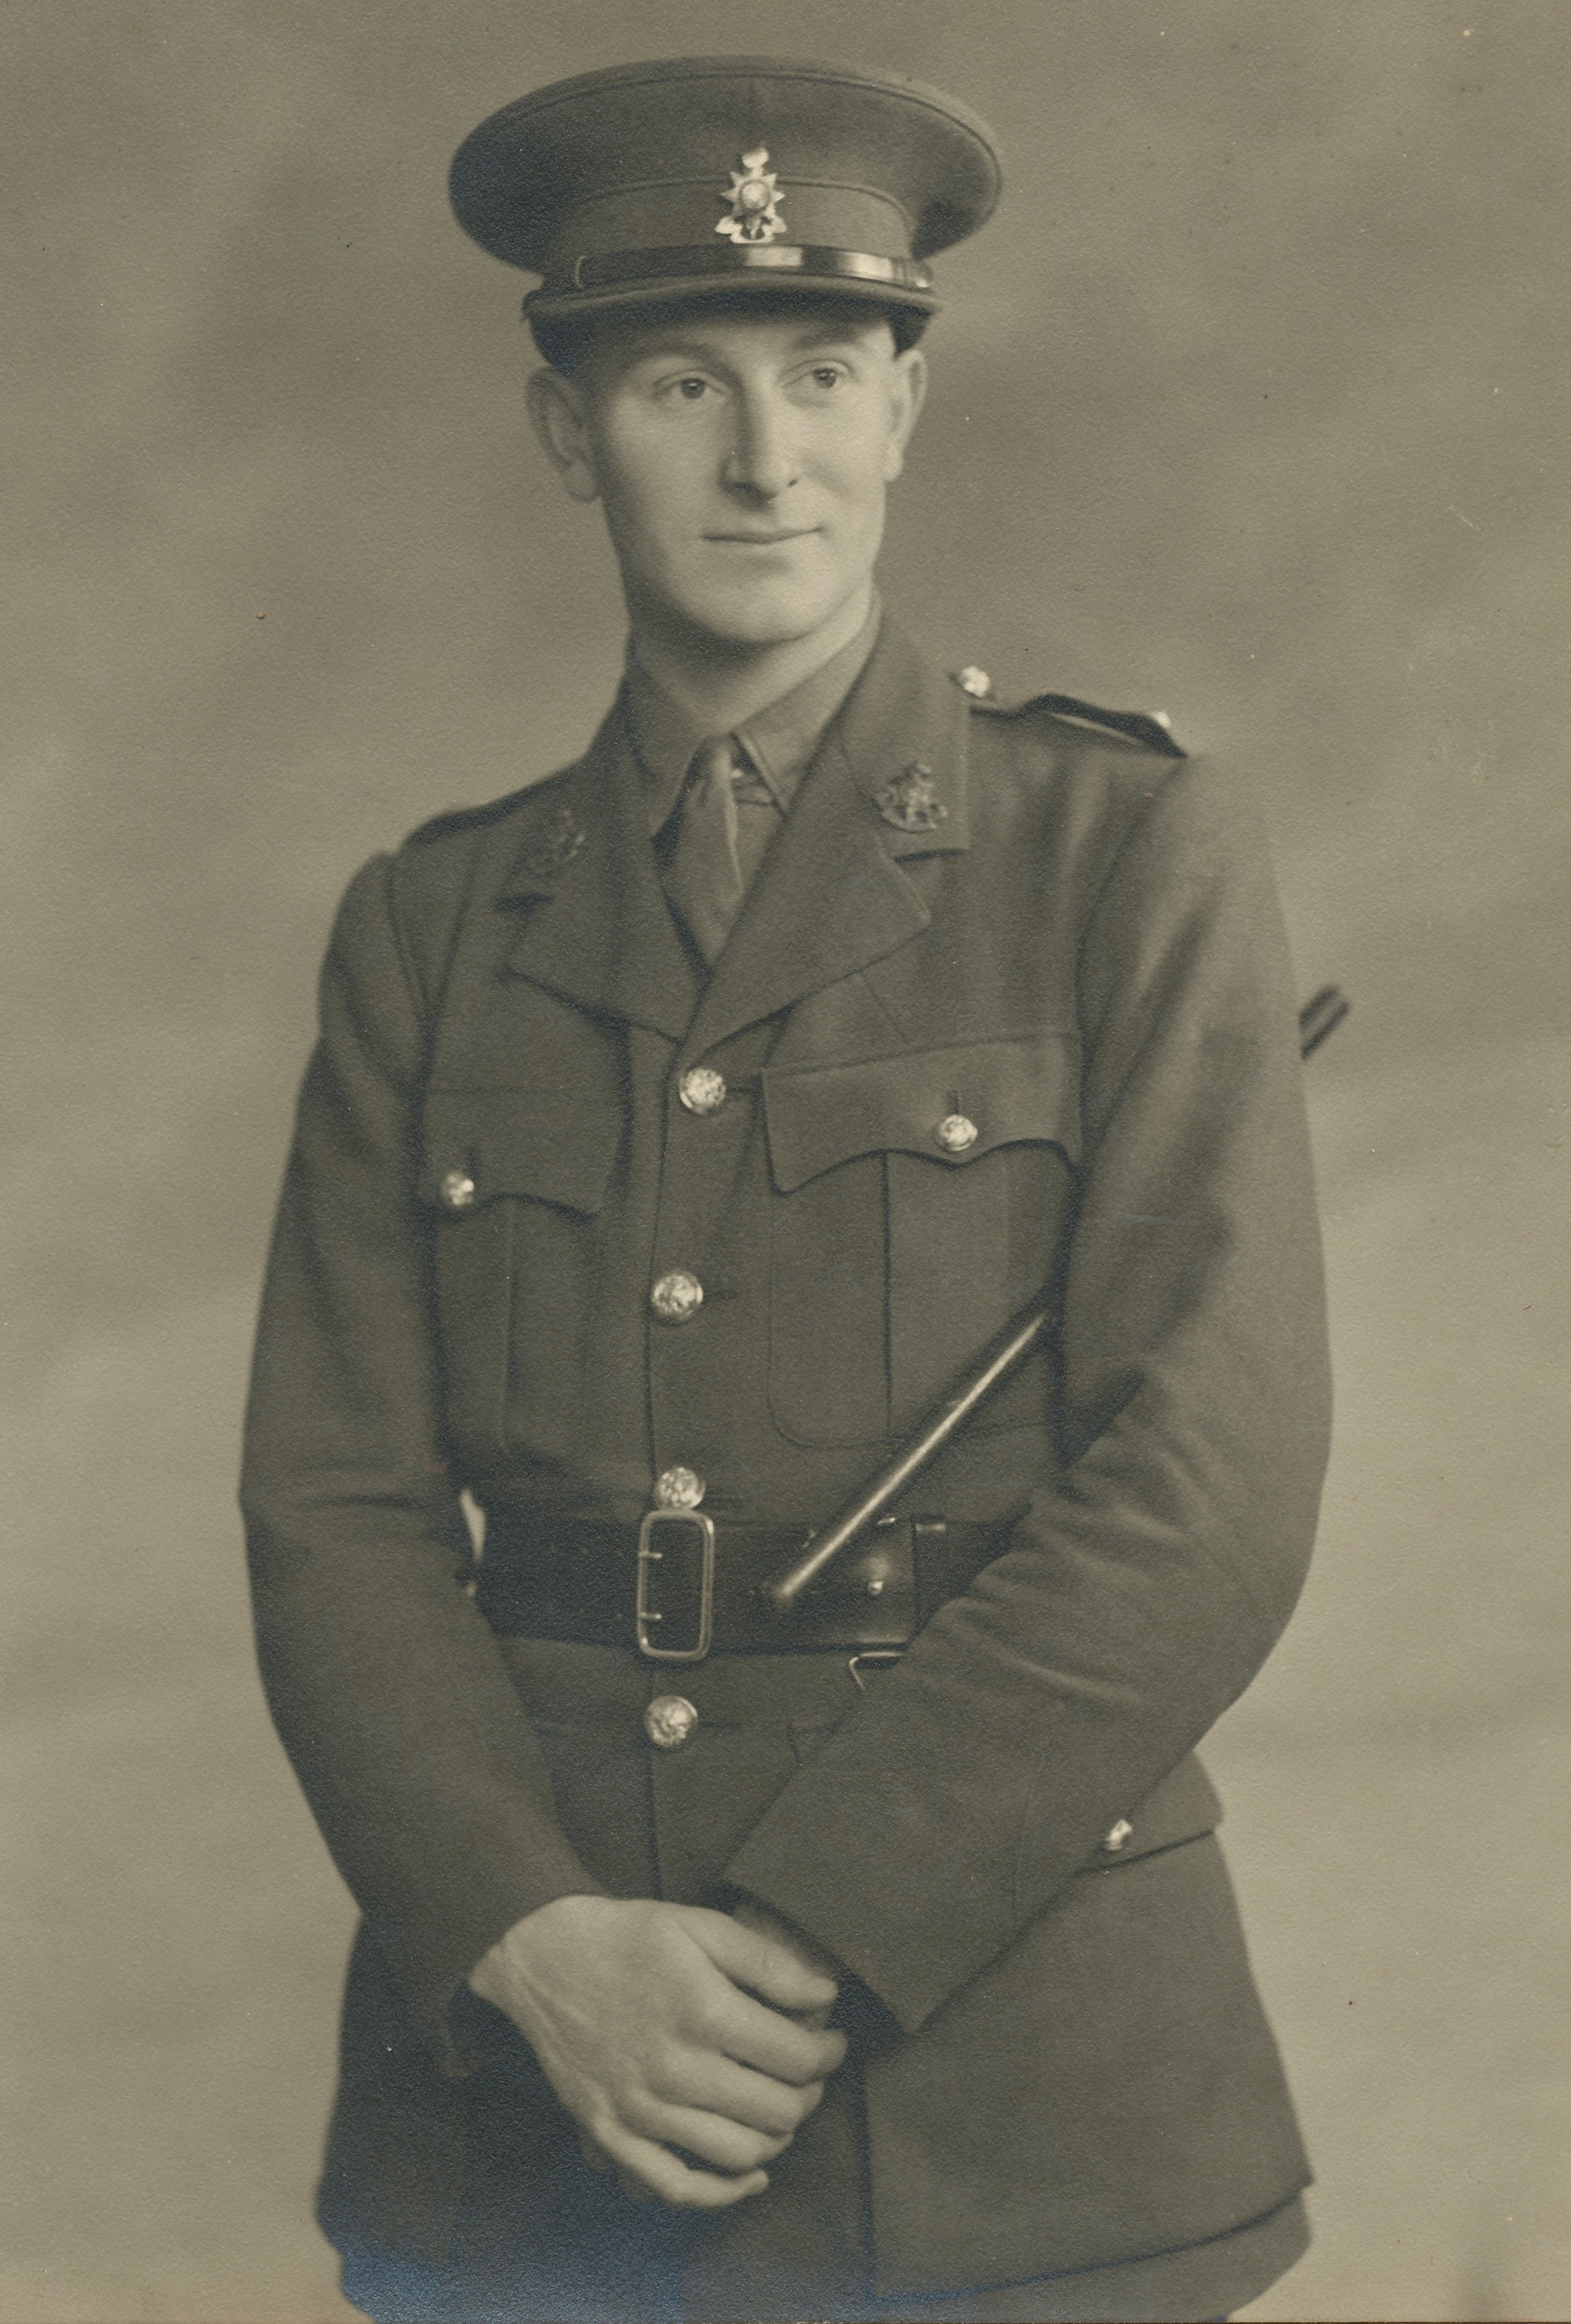 Lieutenant Randle Frederick Hicks Darwall-Smith newly commissioned in 1939